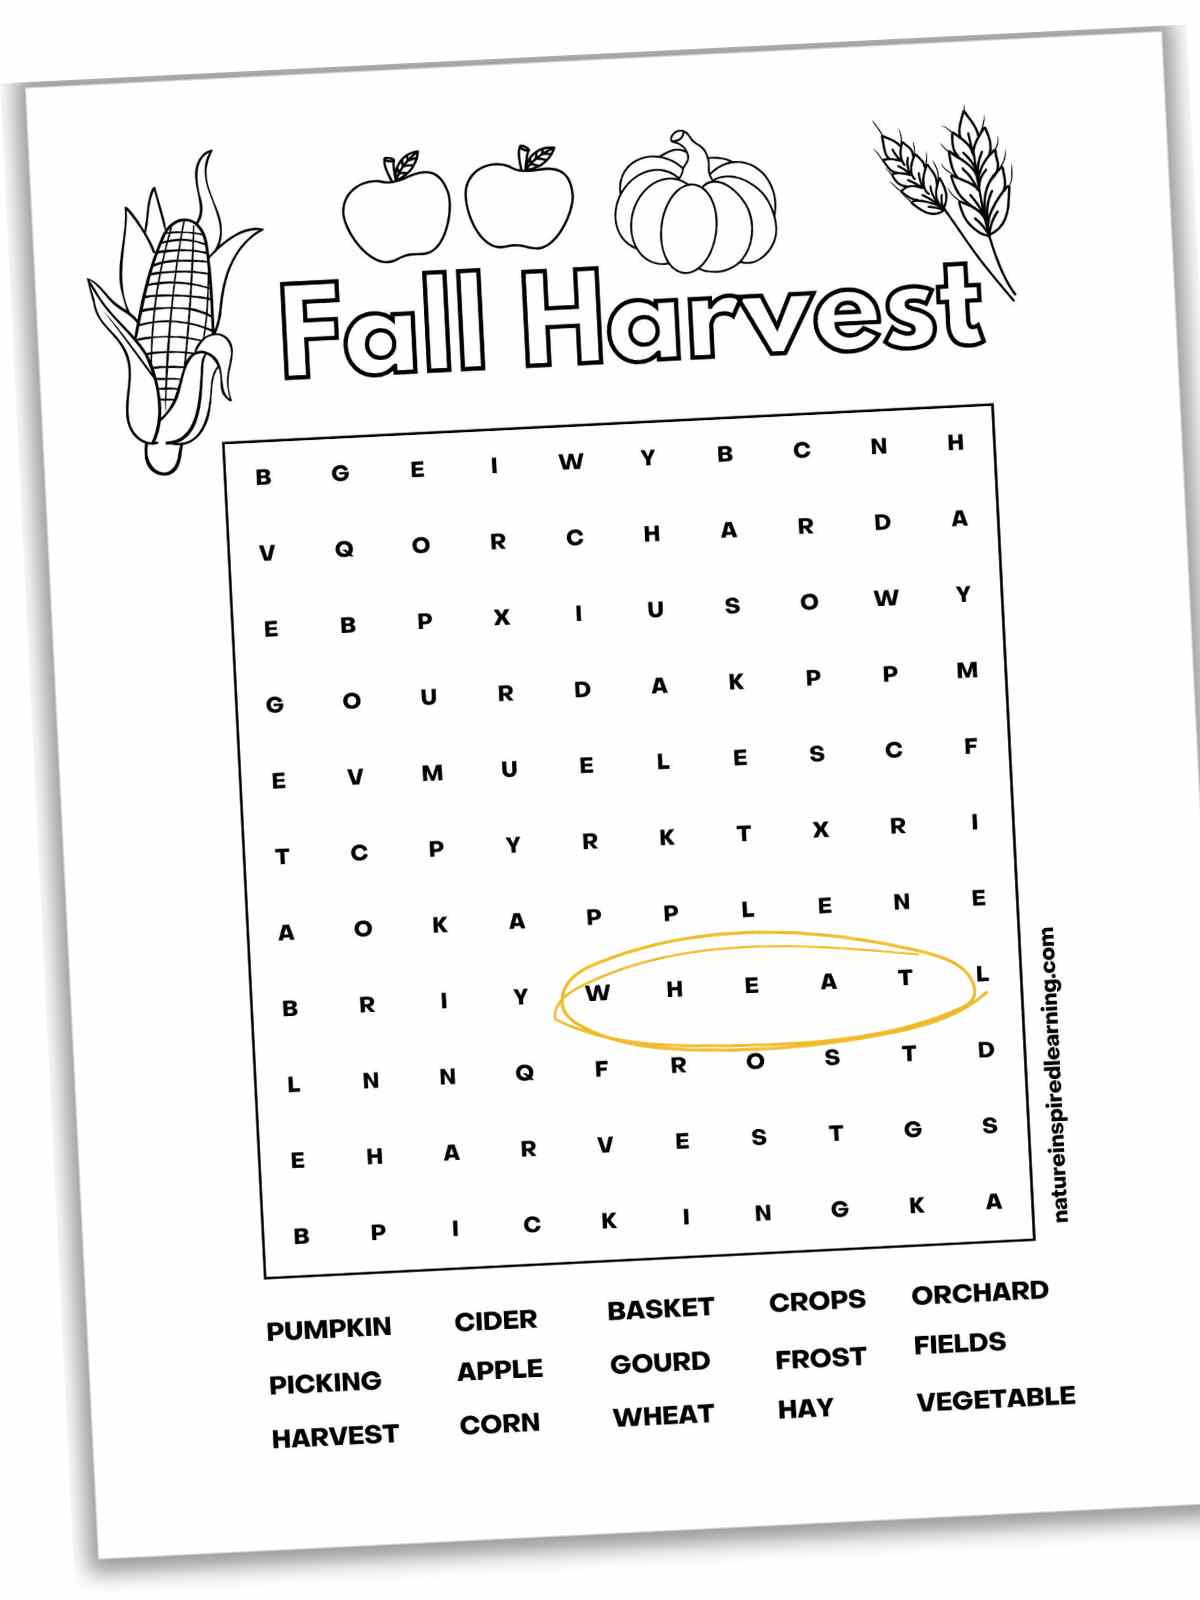 Fall harvest word search with 15 hidden words. The word wheat circled in yellow on the printable.